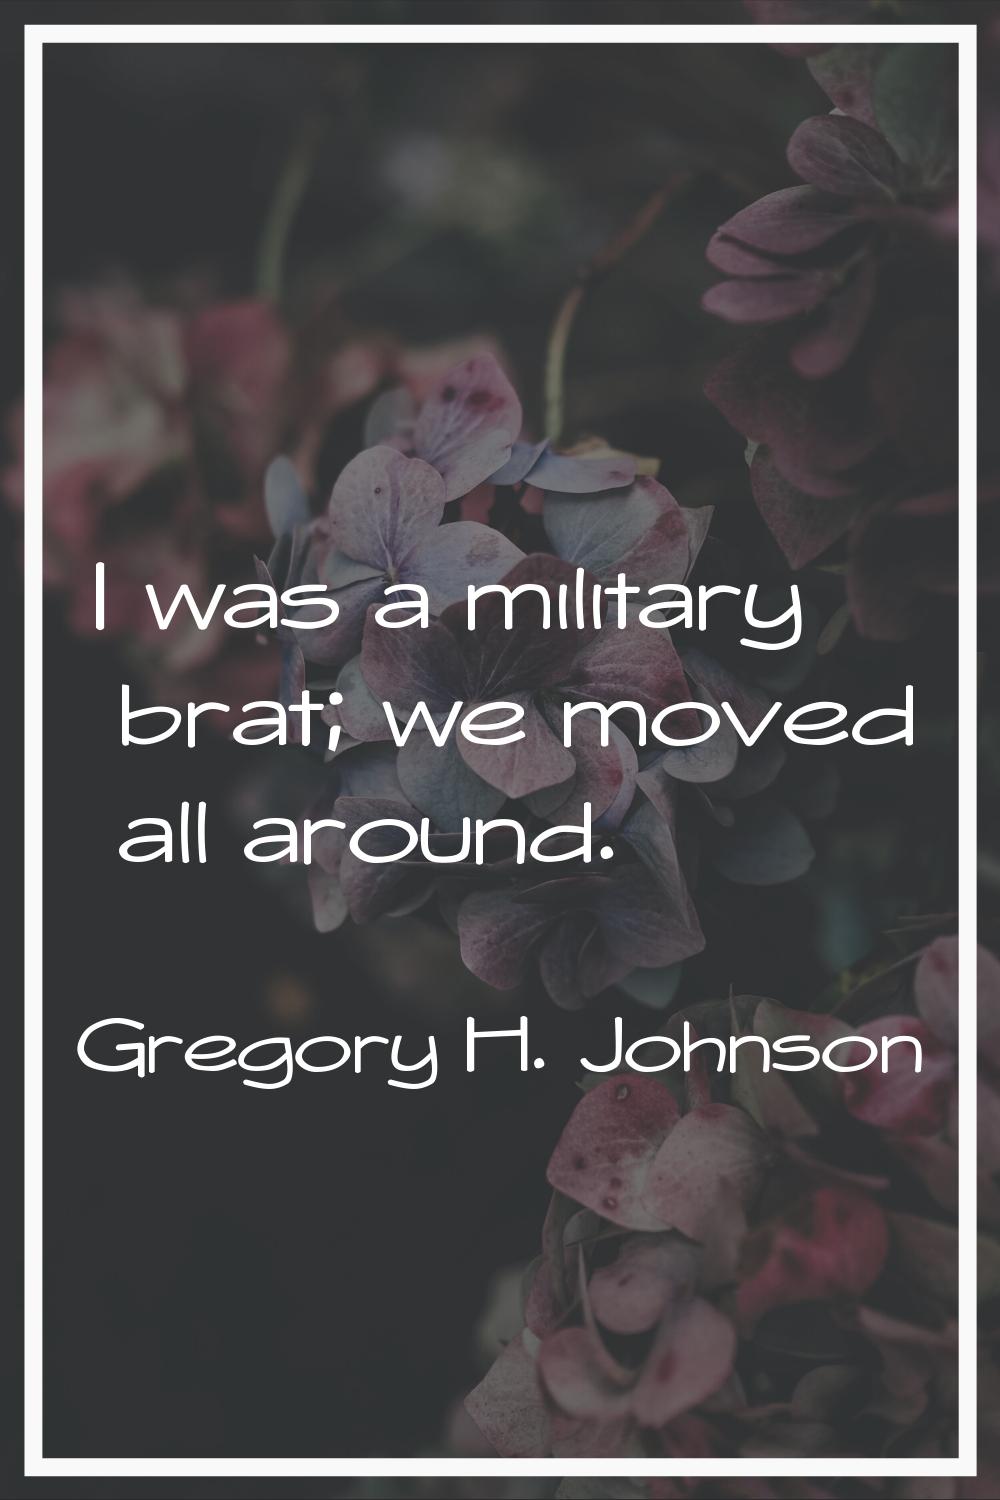 I was a military brat; we moved all around.